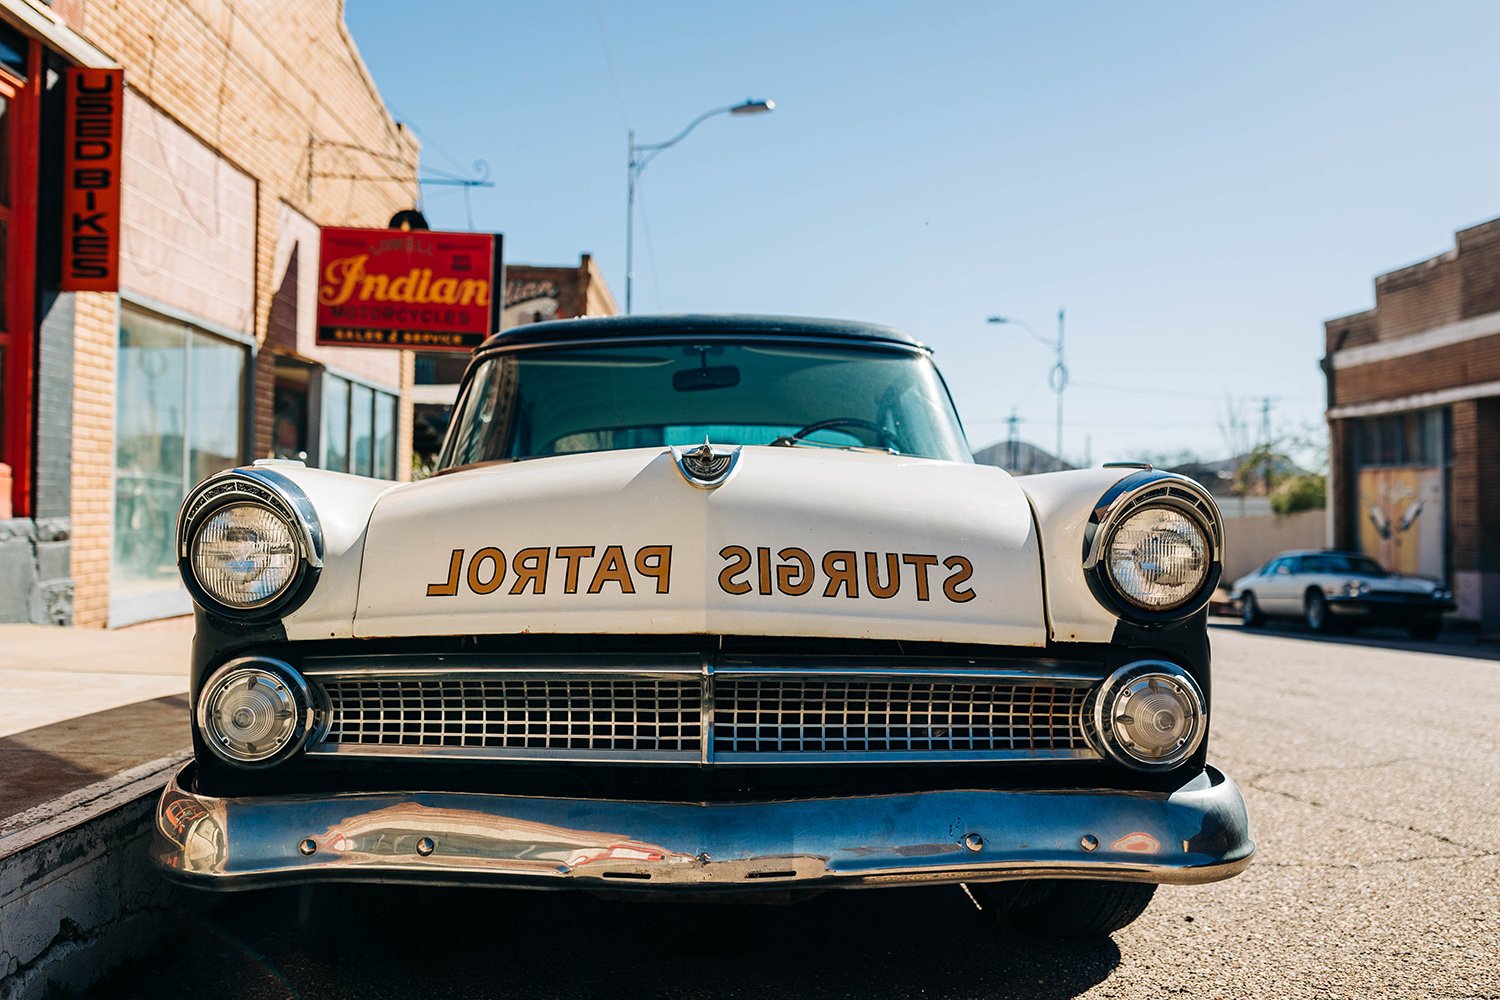 A retro police car in an historical area in Bisbee, Arizona.